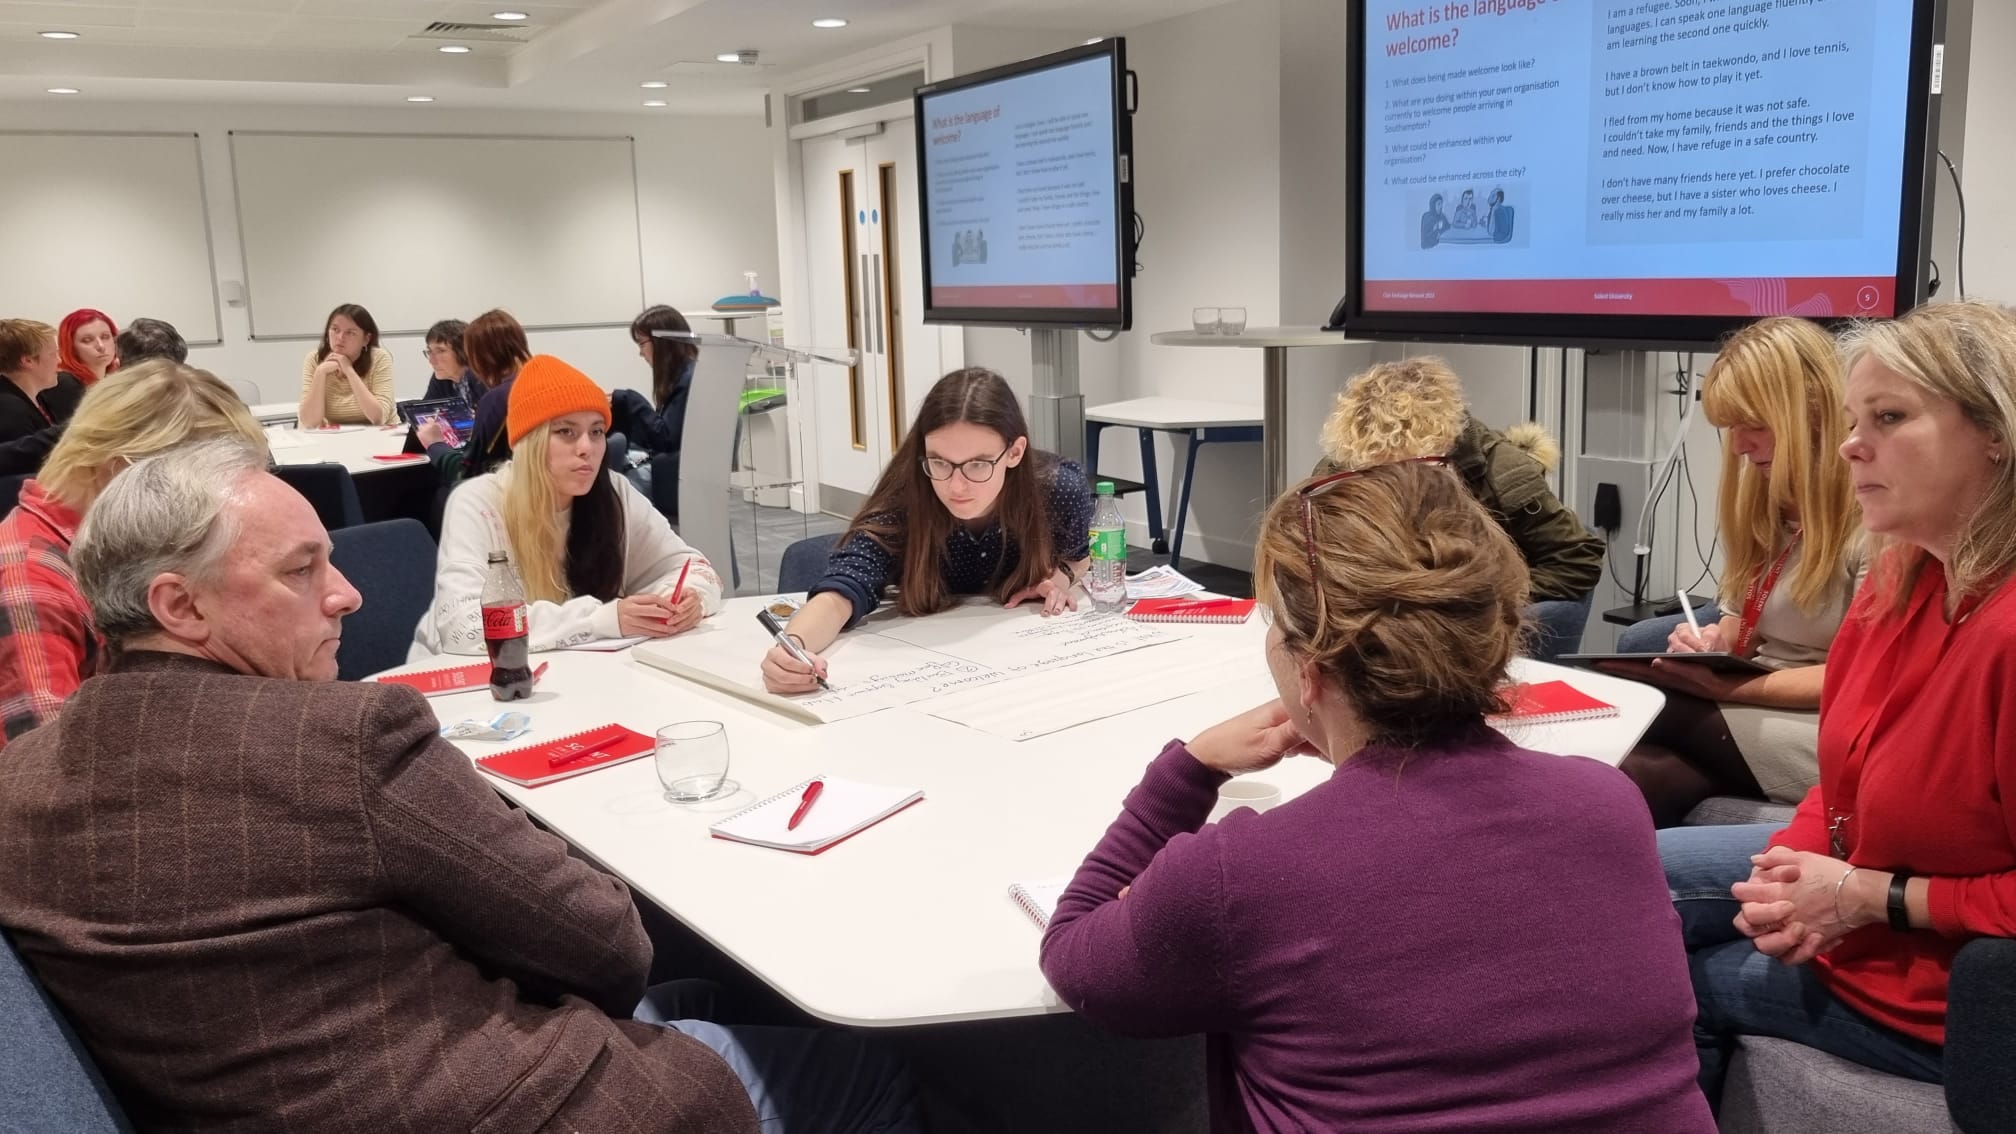 Attendees at the first Civic Exchange Network event at Solent University discussing various topics, including what the language of welcome is.